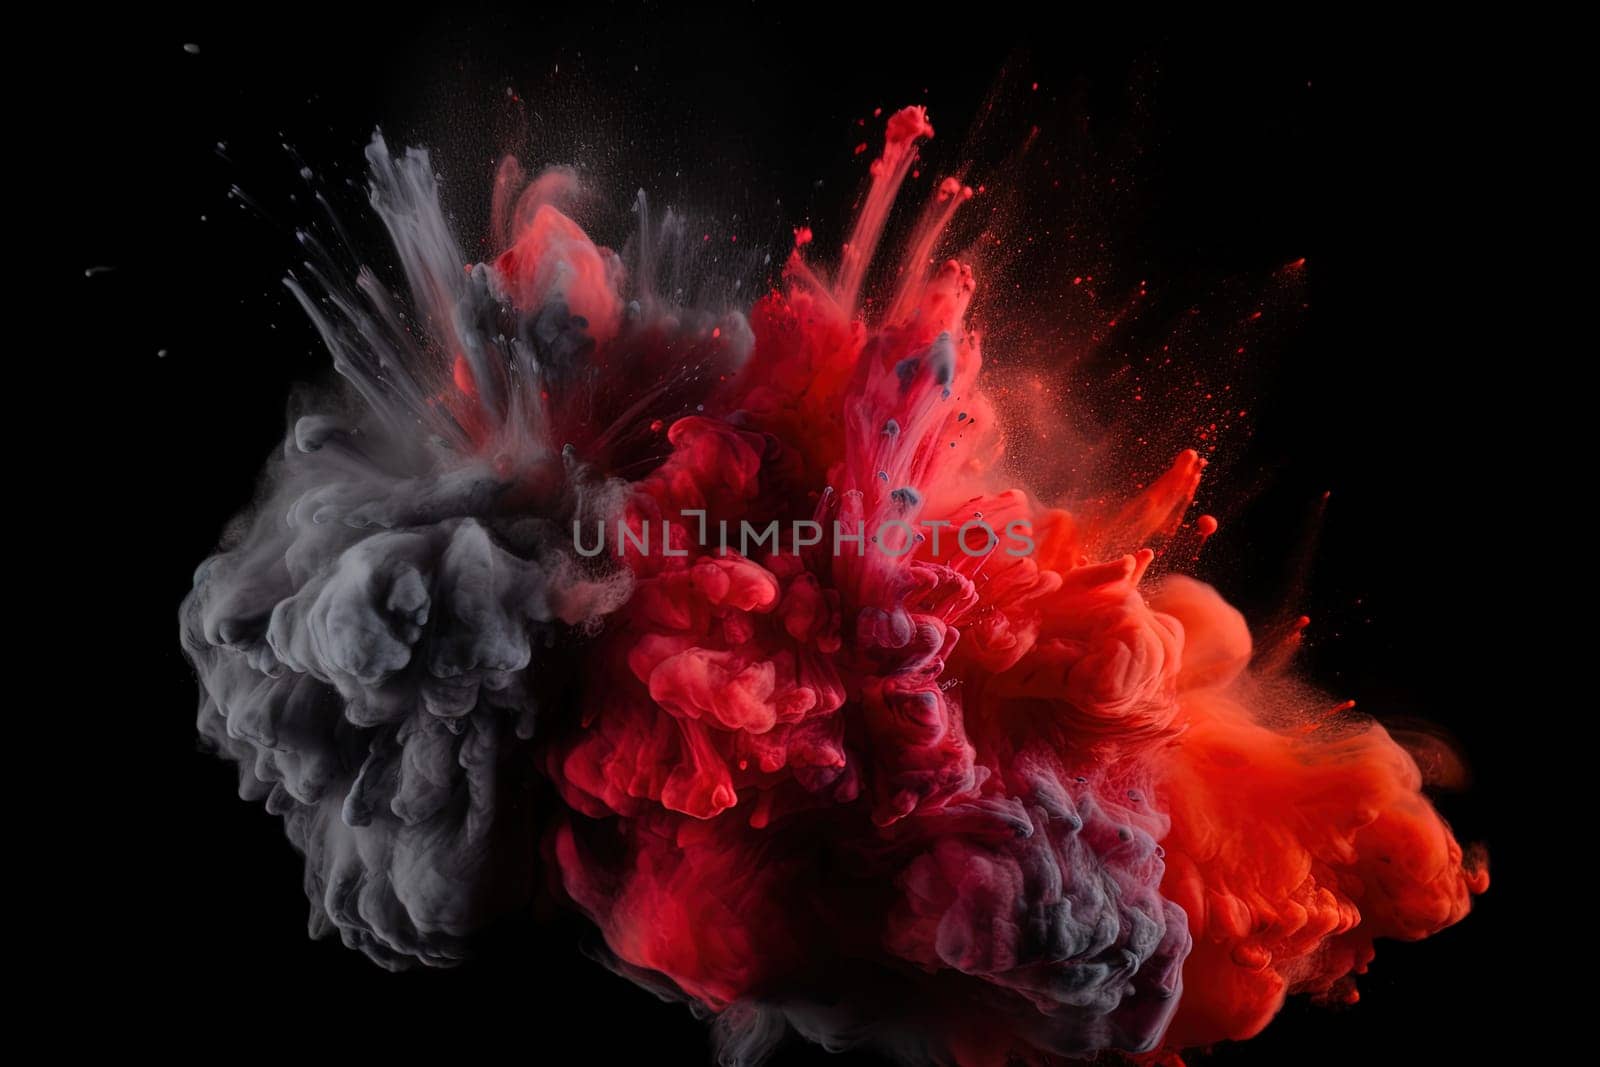 black and red Holi Powder paints blew up on a black background